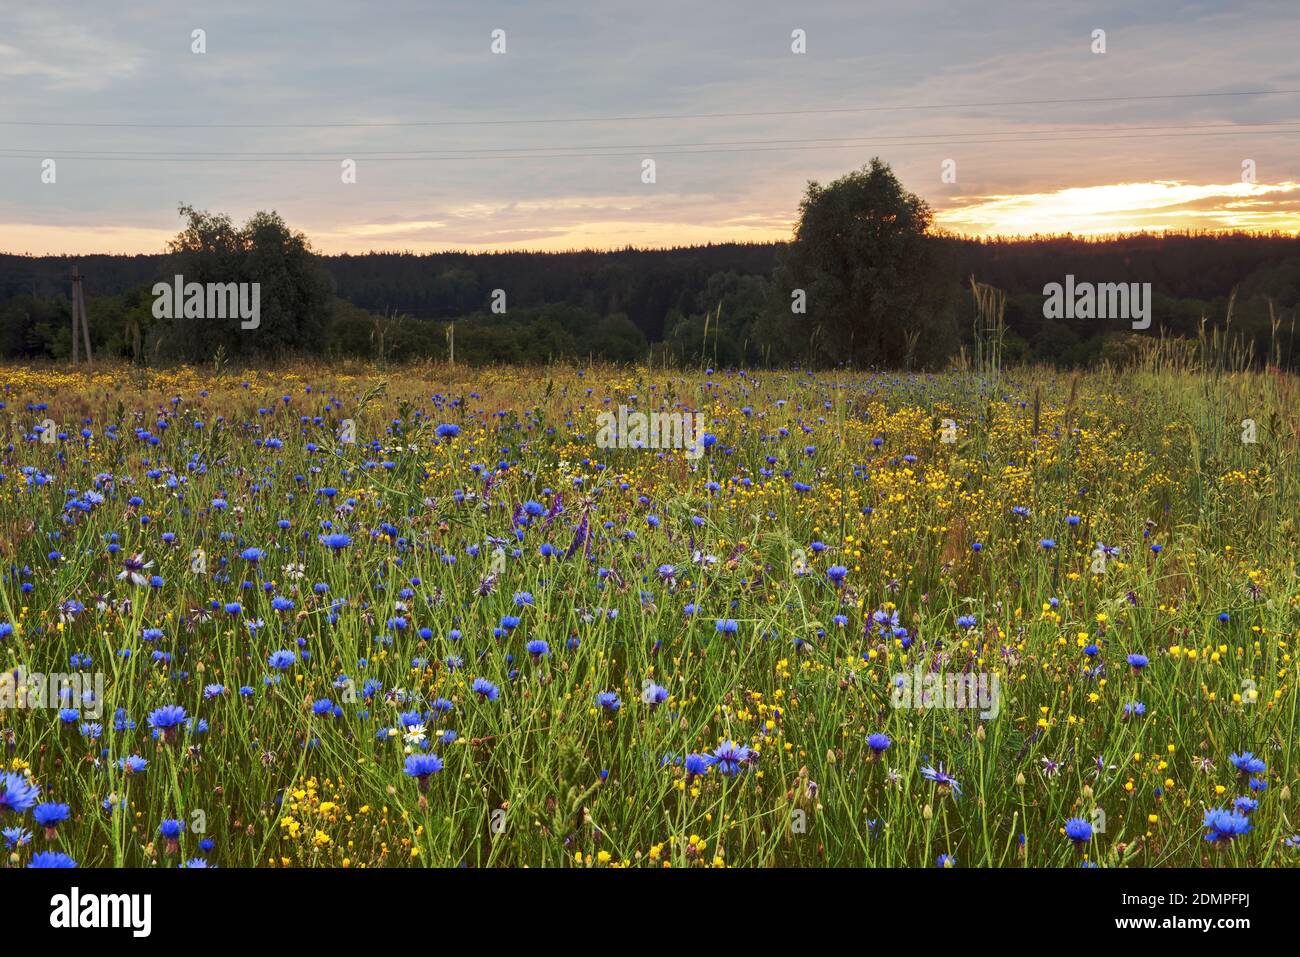 View of a flower meadow in the field. Stock Photo